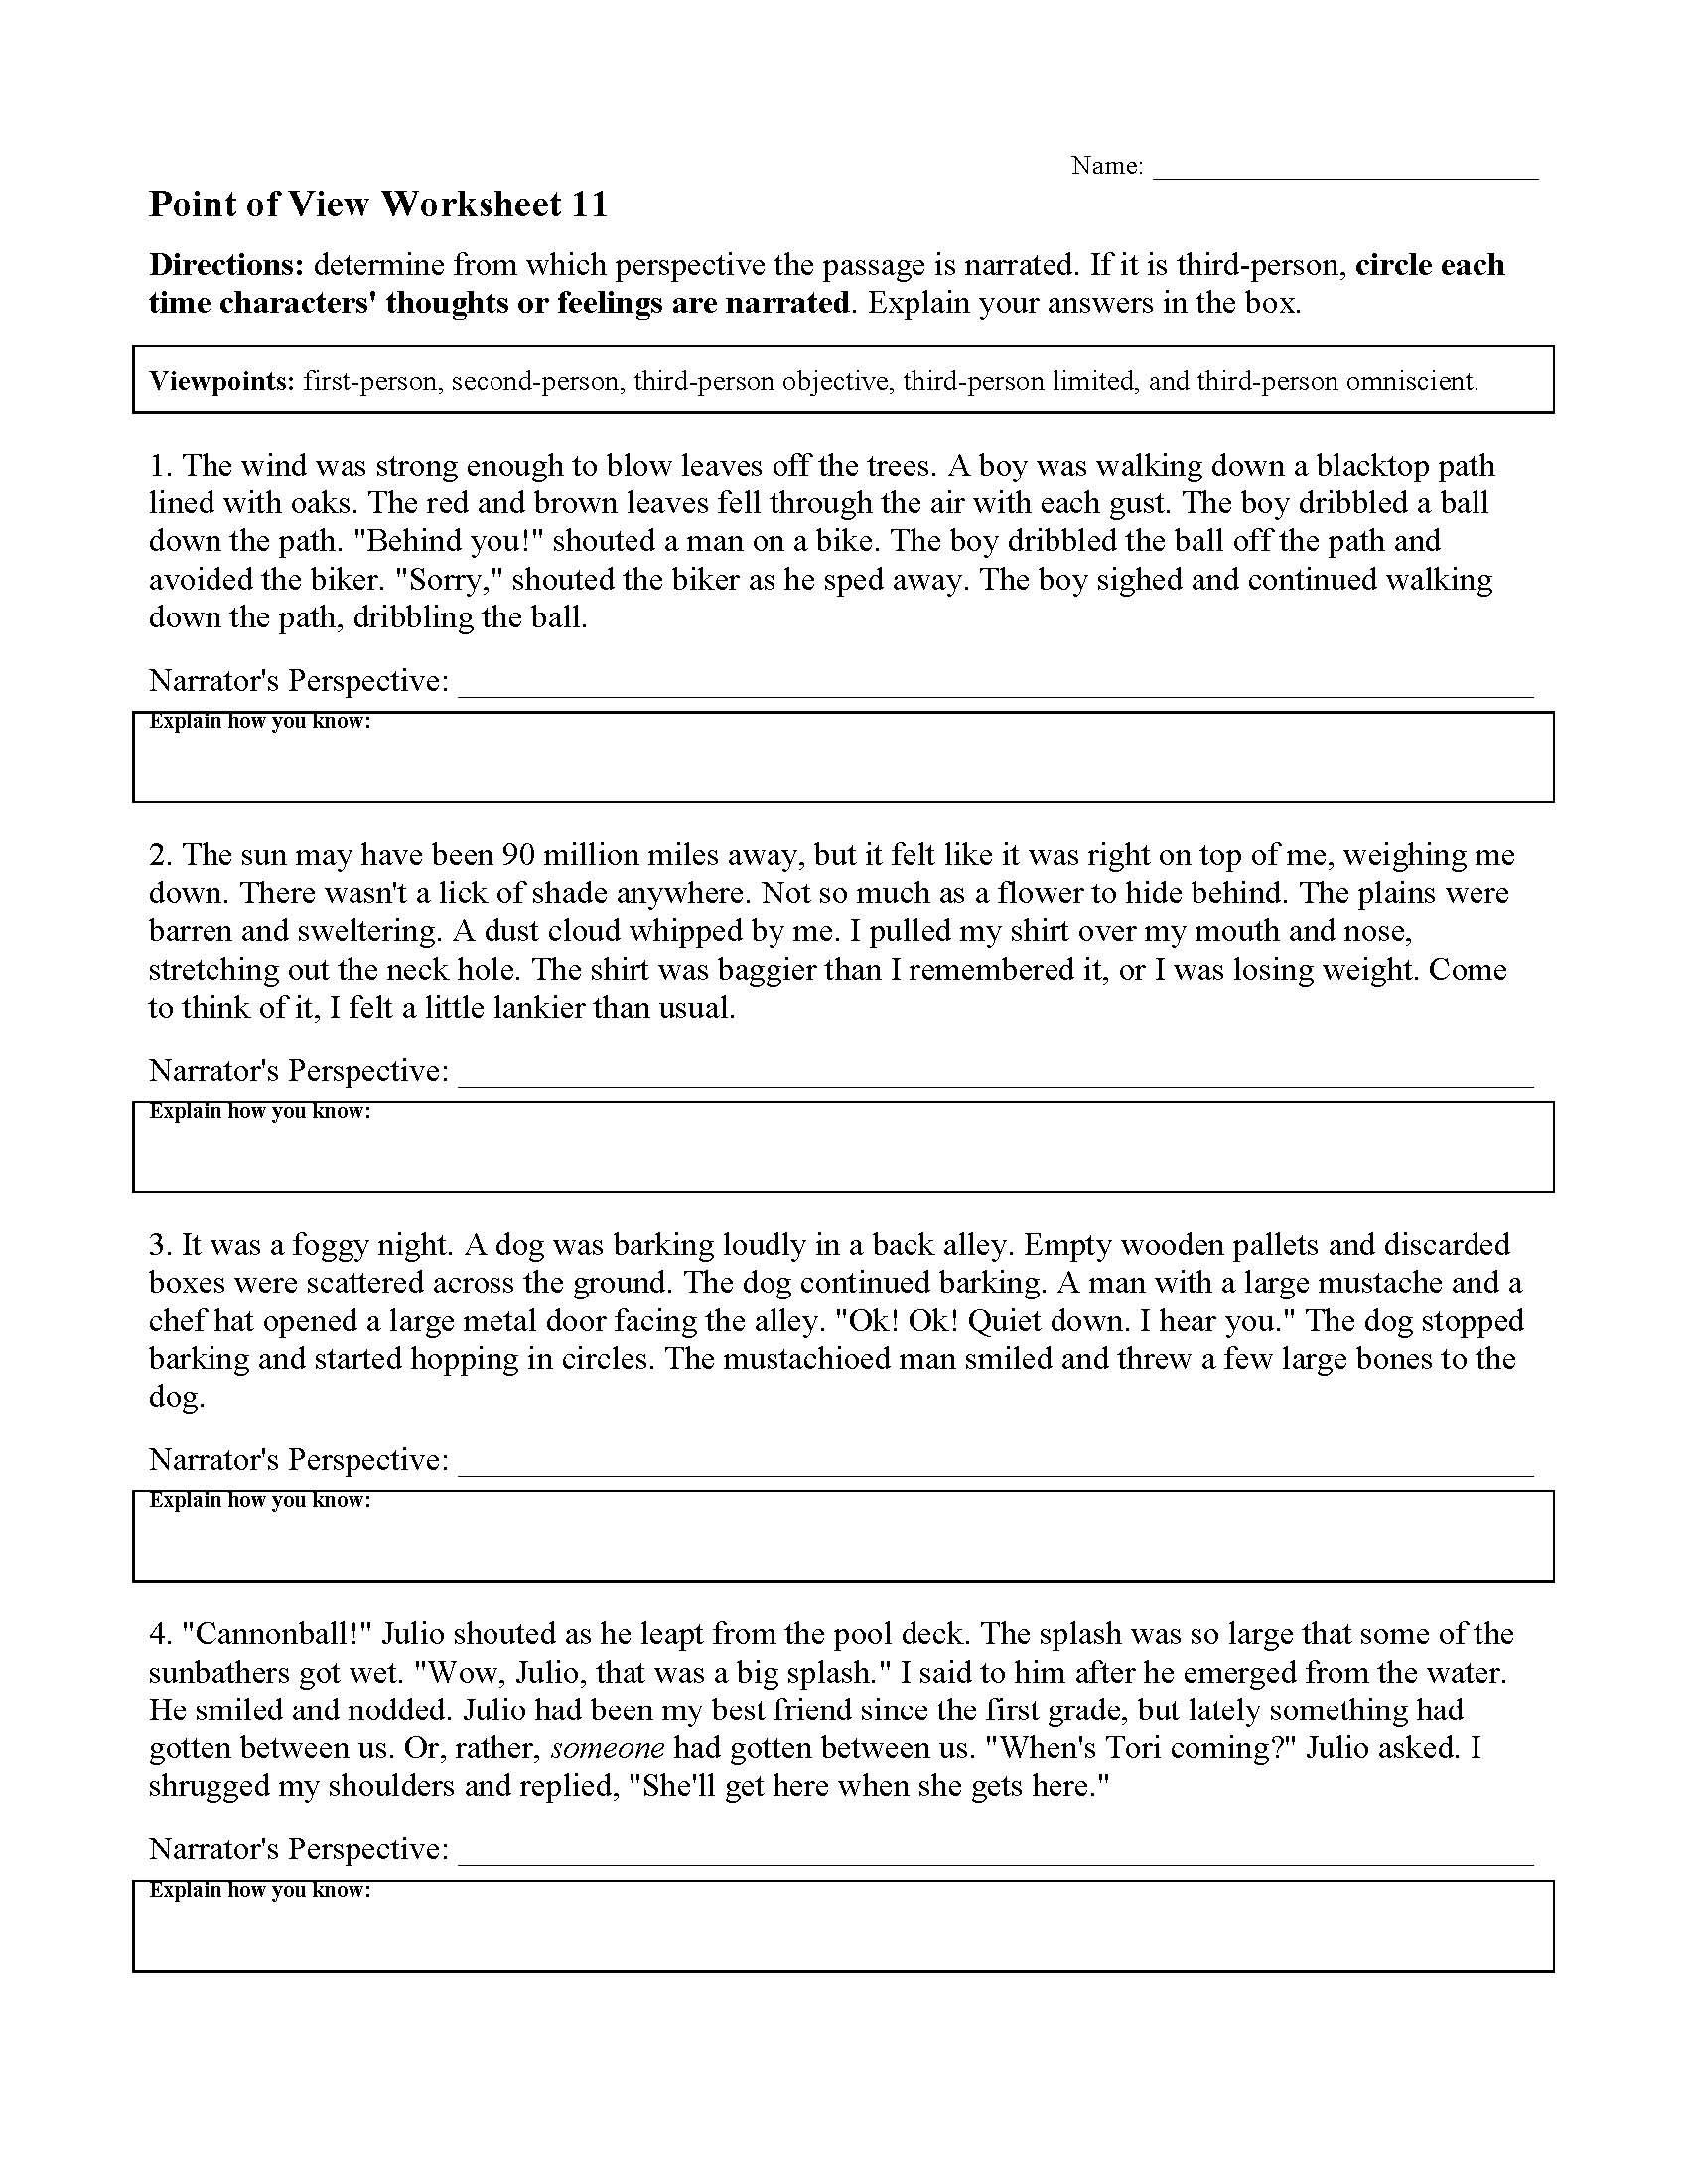 Point Of View Worksheet 11  Preview Pertaining To Point Of View Worksheet 11